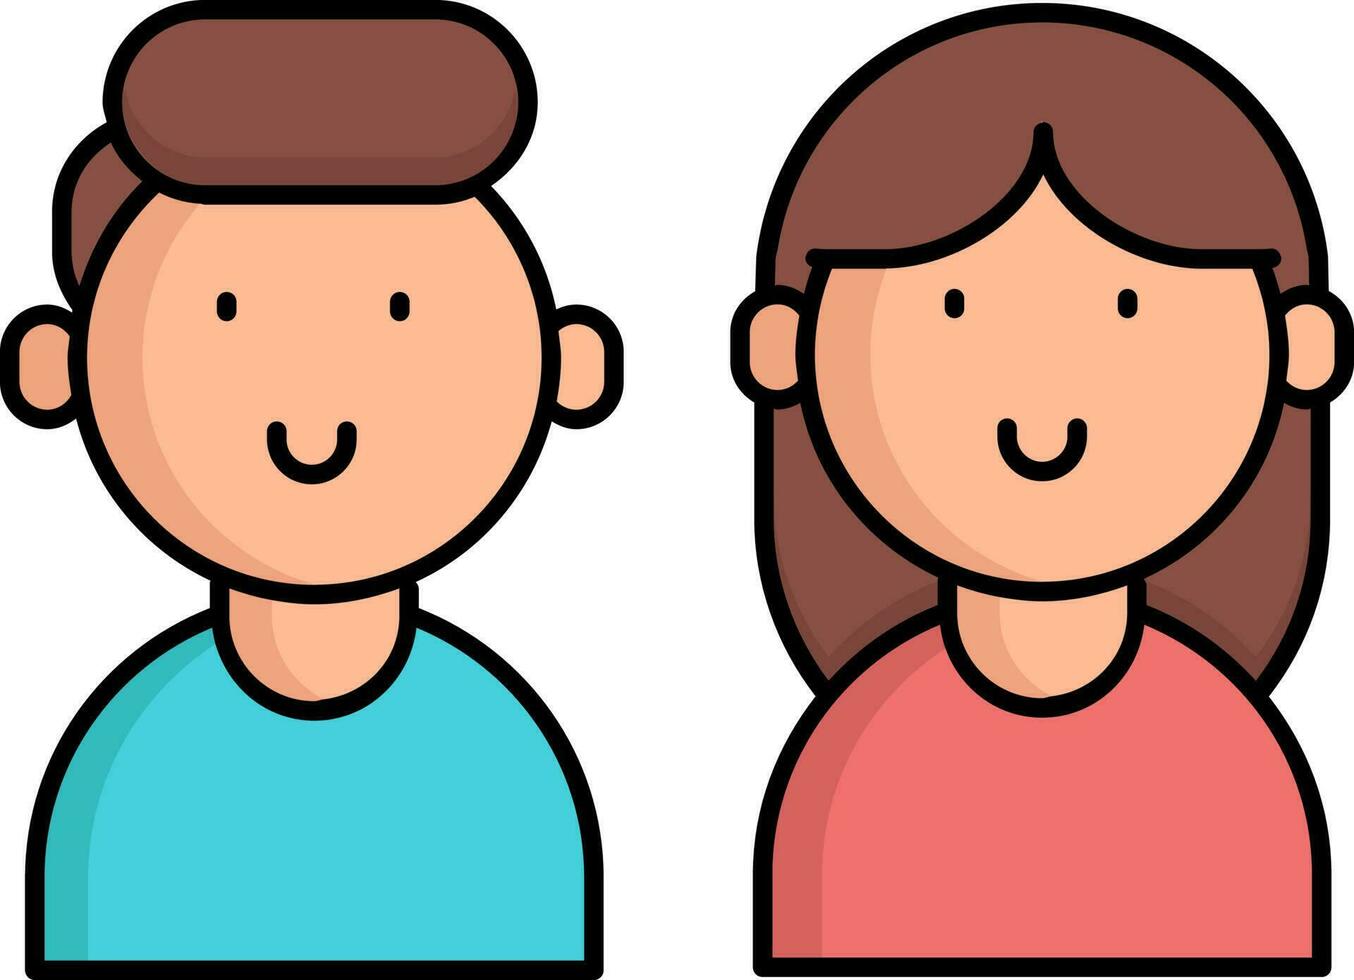 Young Boy And Girl Or Couple Icon In Flat Style. vector